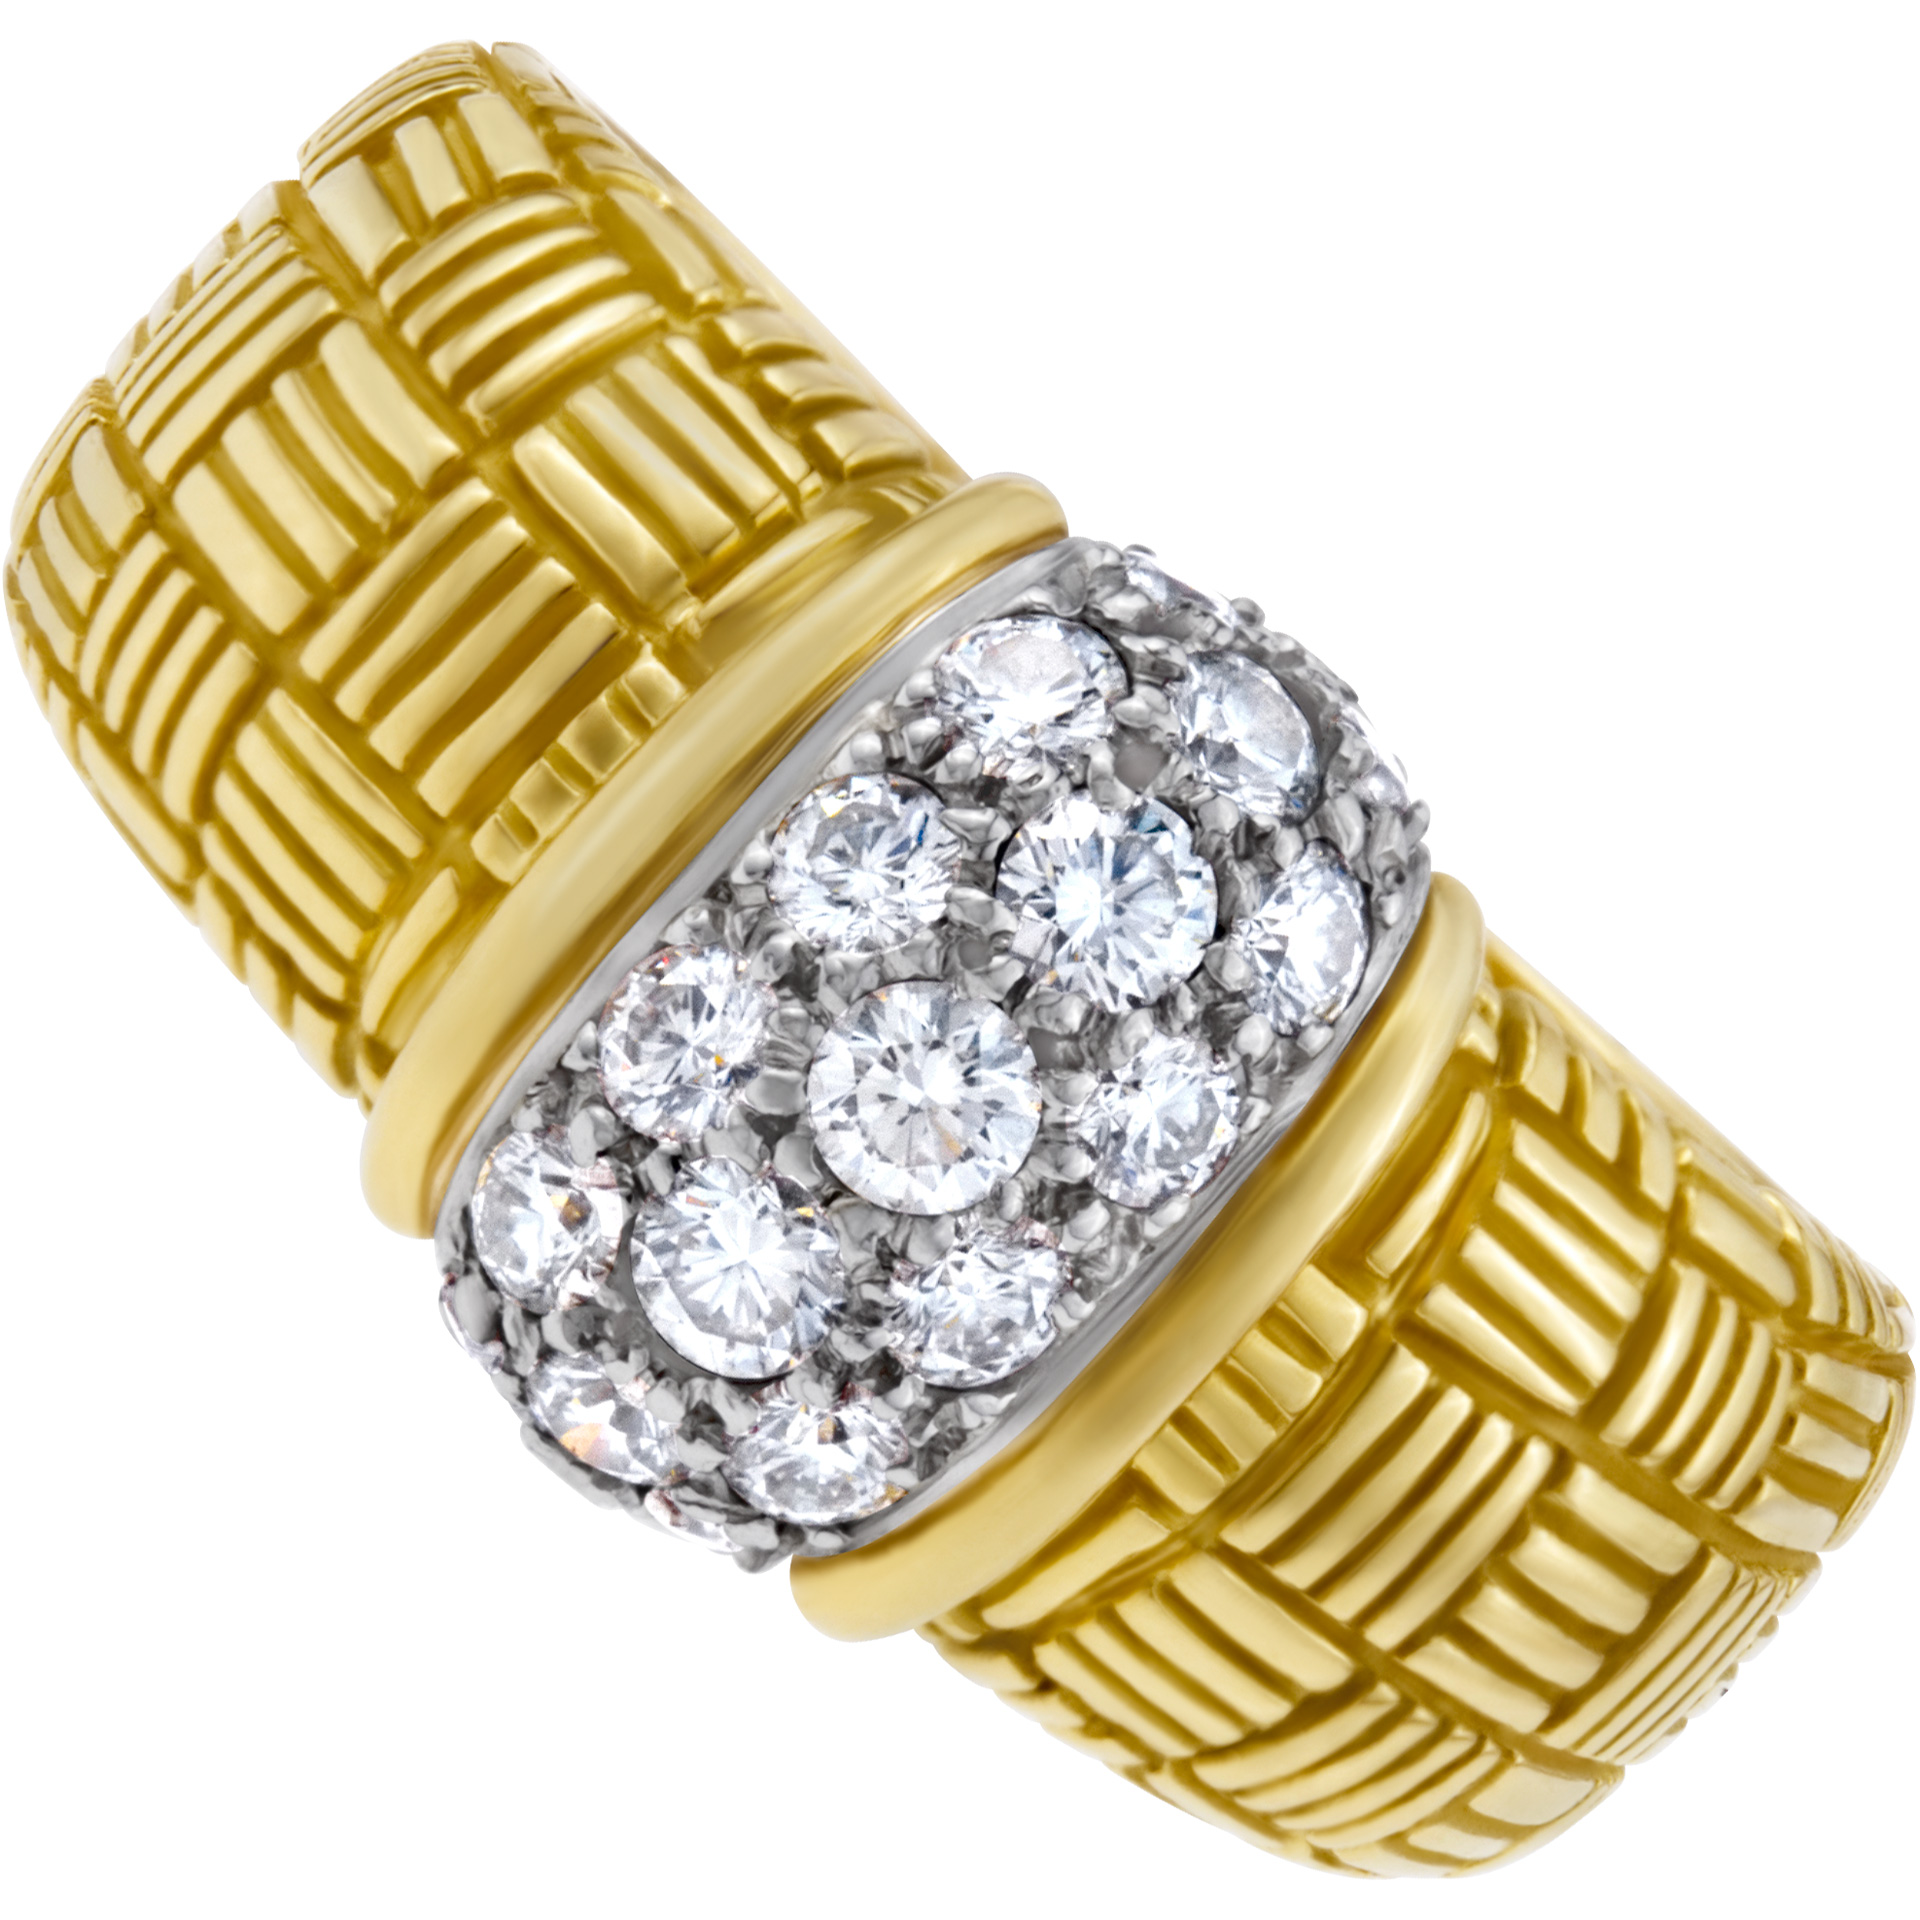 Pave diamond ring in 18k yellow gold. 0.60 carats in diamonds